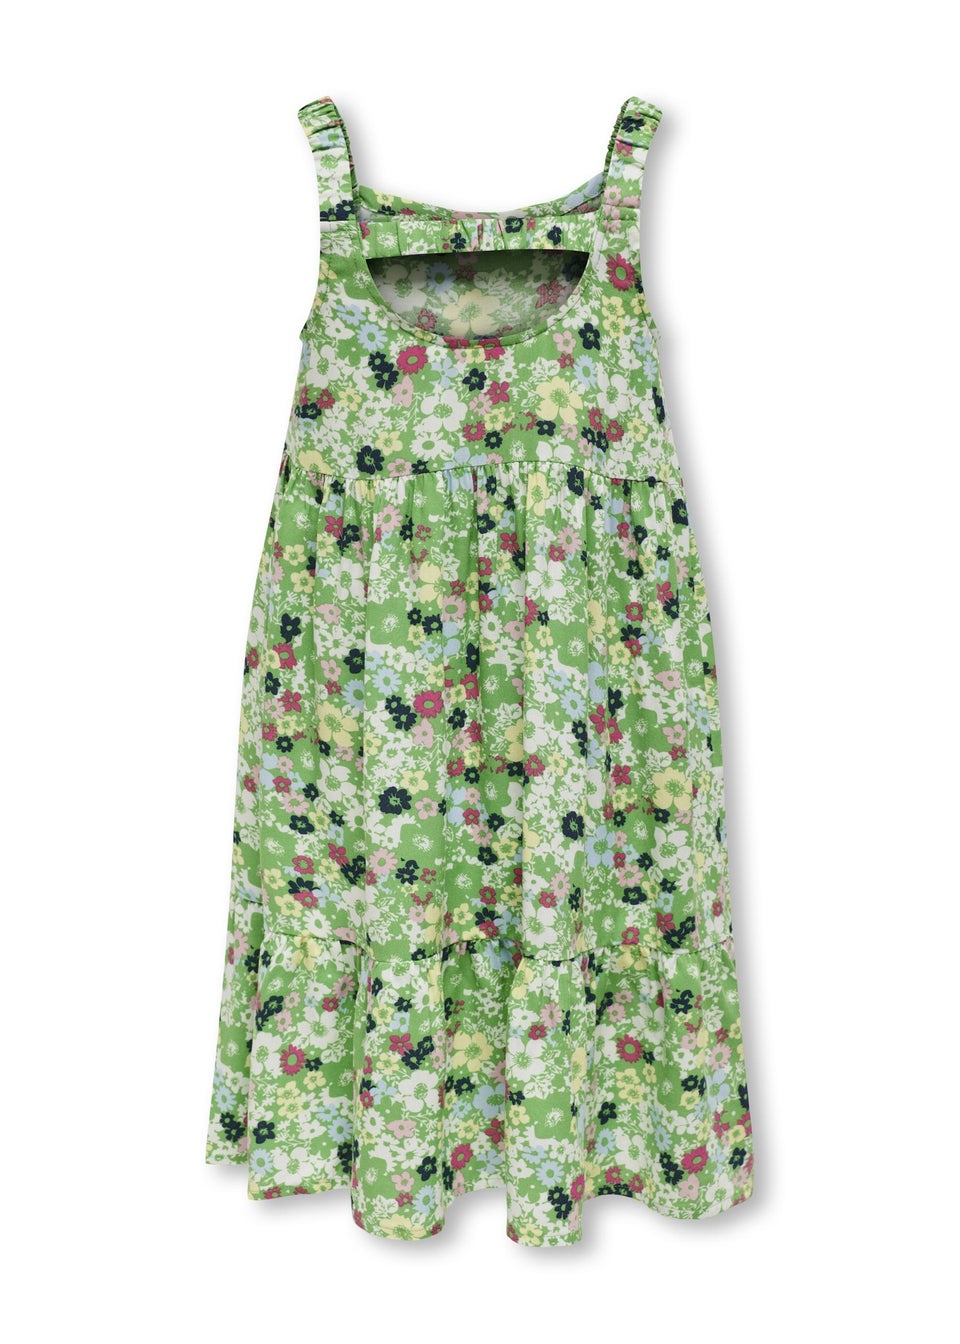 ONLY Girls Multicolour Flower Layered Dress (6-14yrs)